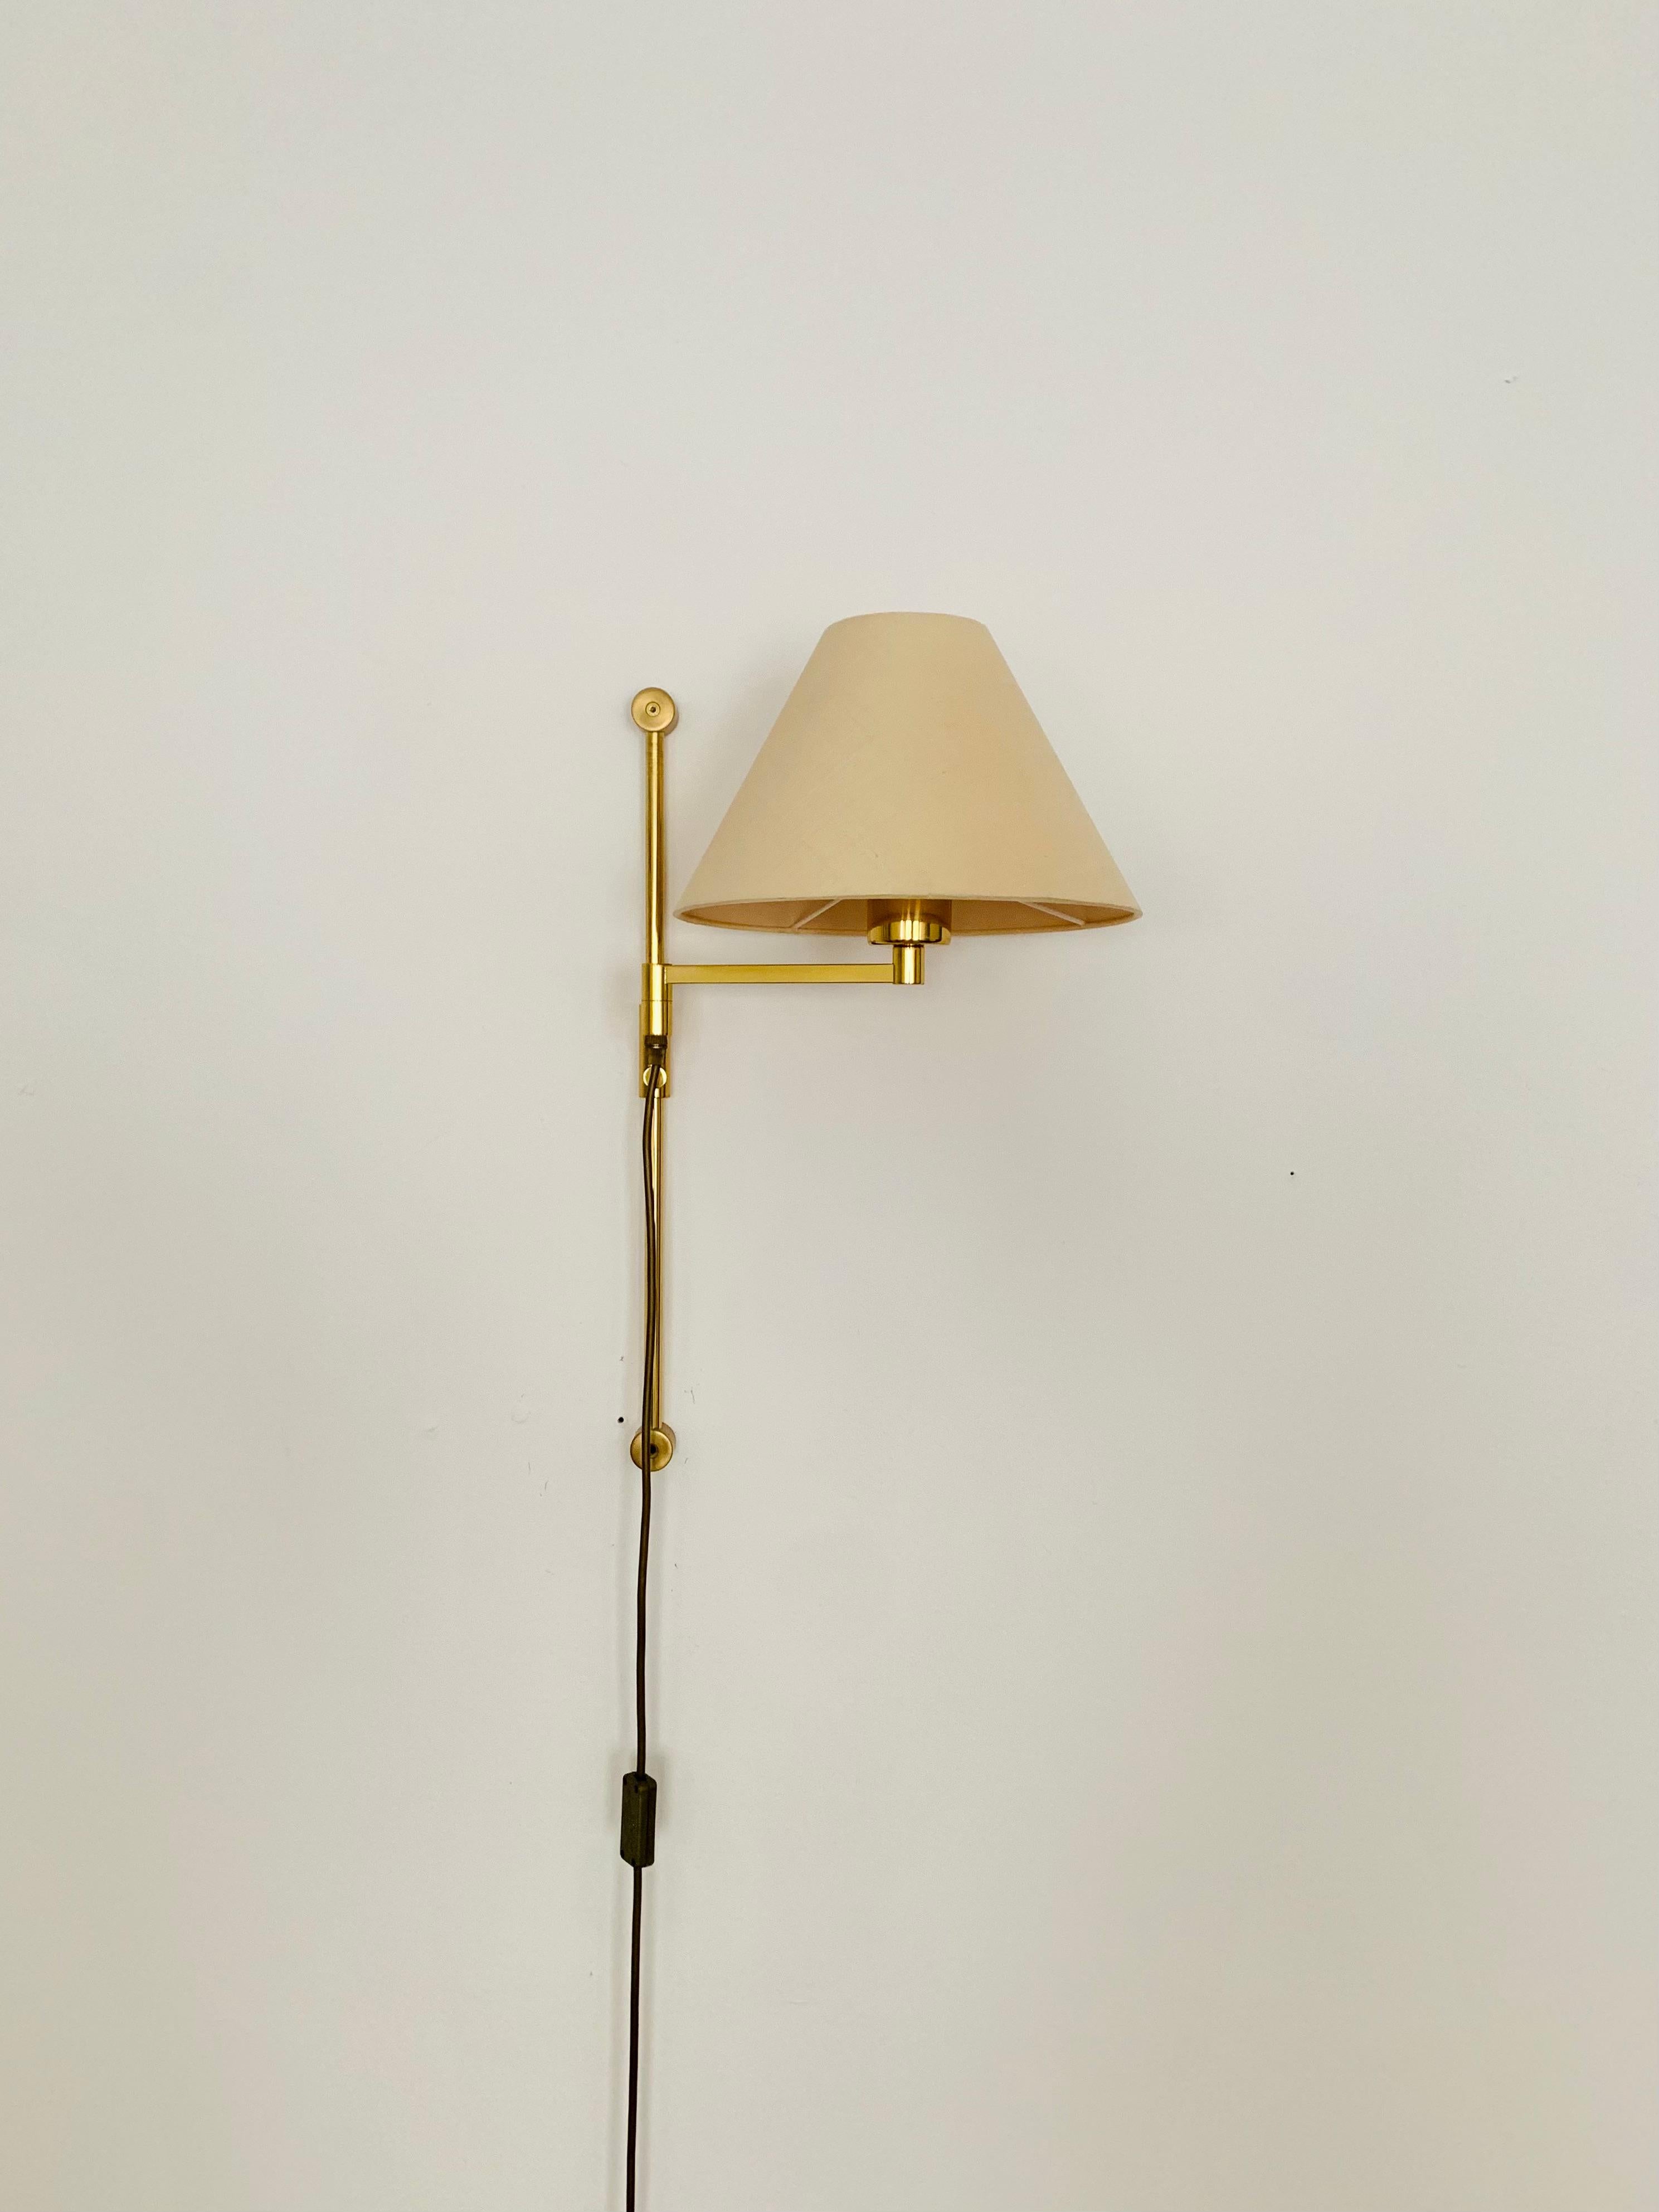 Adjustable Brass Wall Lamp In Good Condition For Sale In München, DE